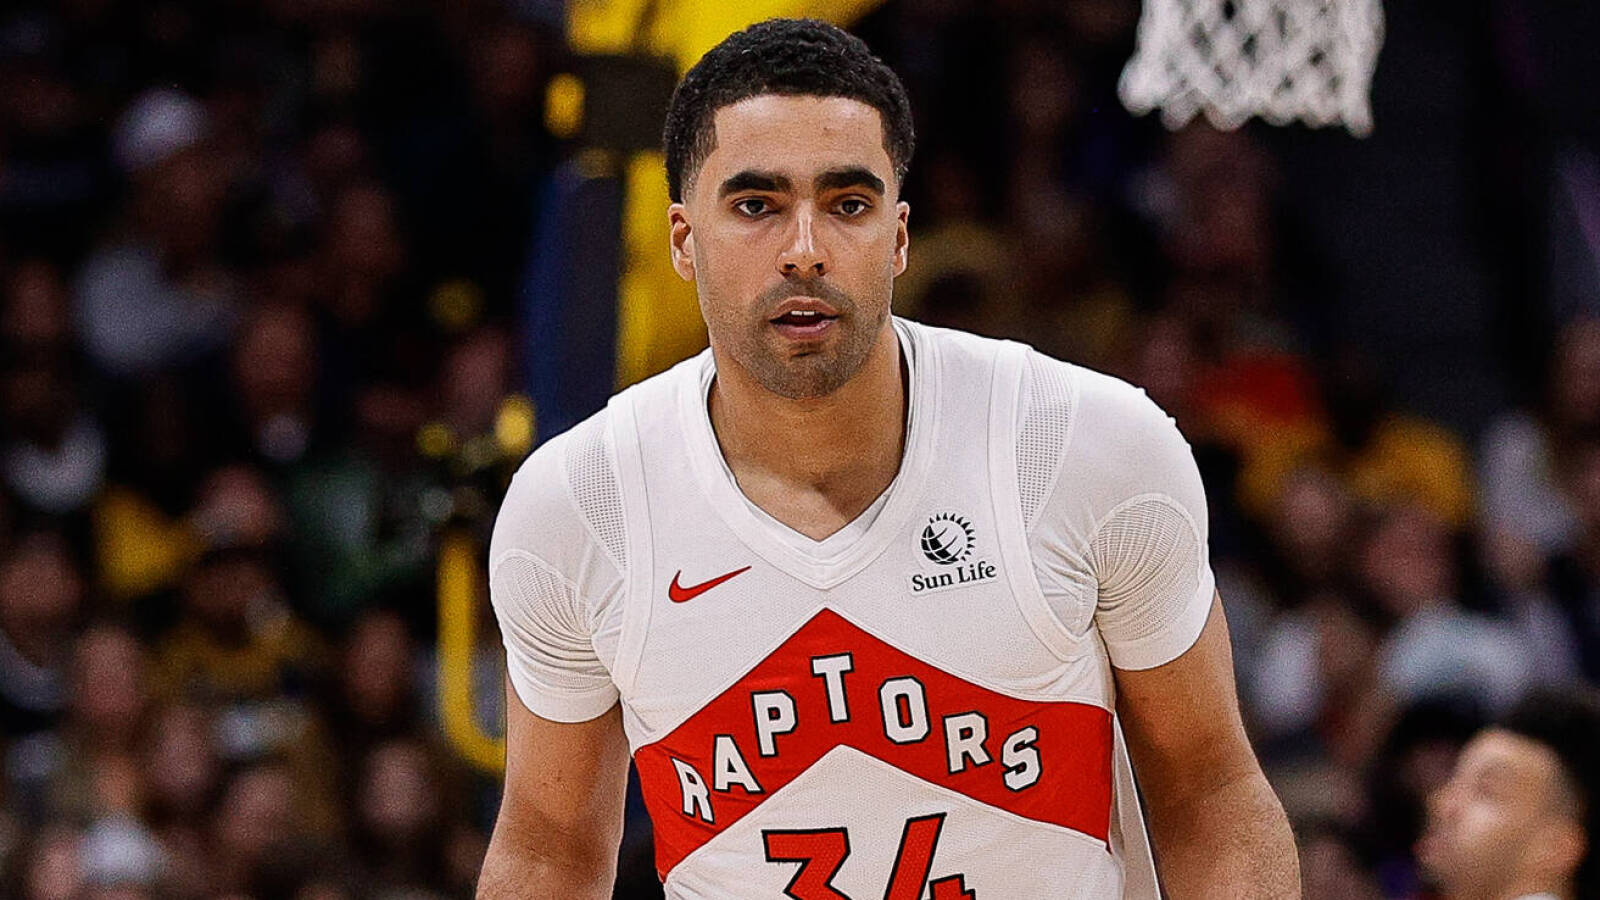 NBA hands Raptors forward a lifetime ban for his part in betting scandal